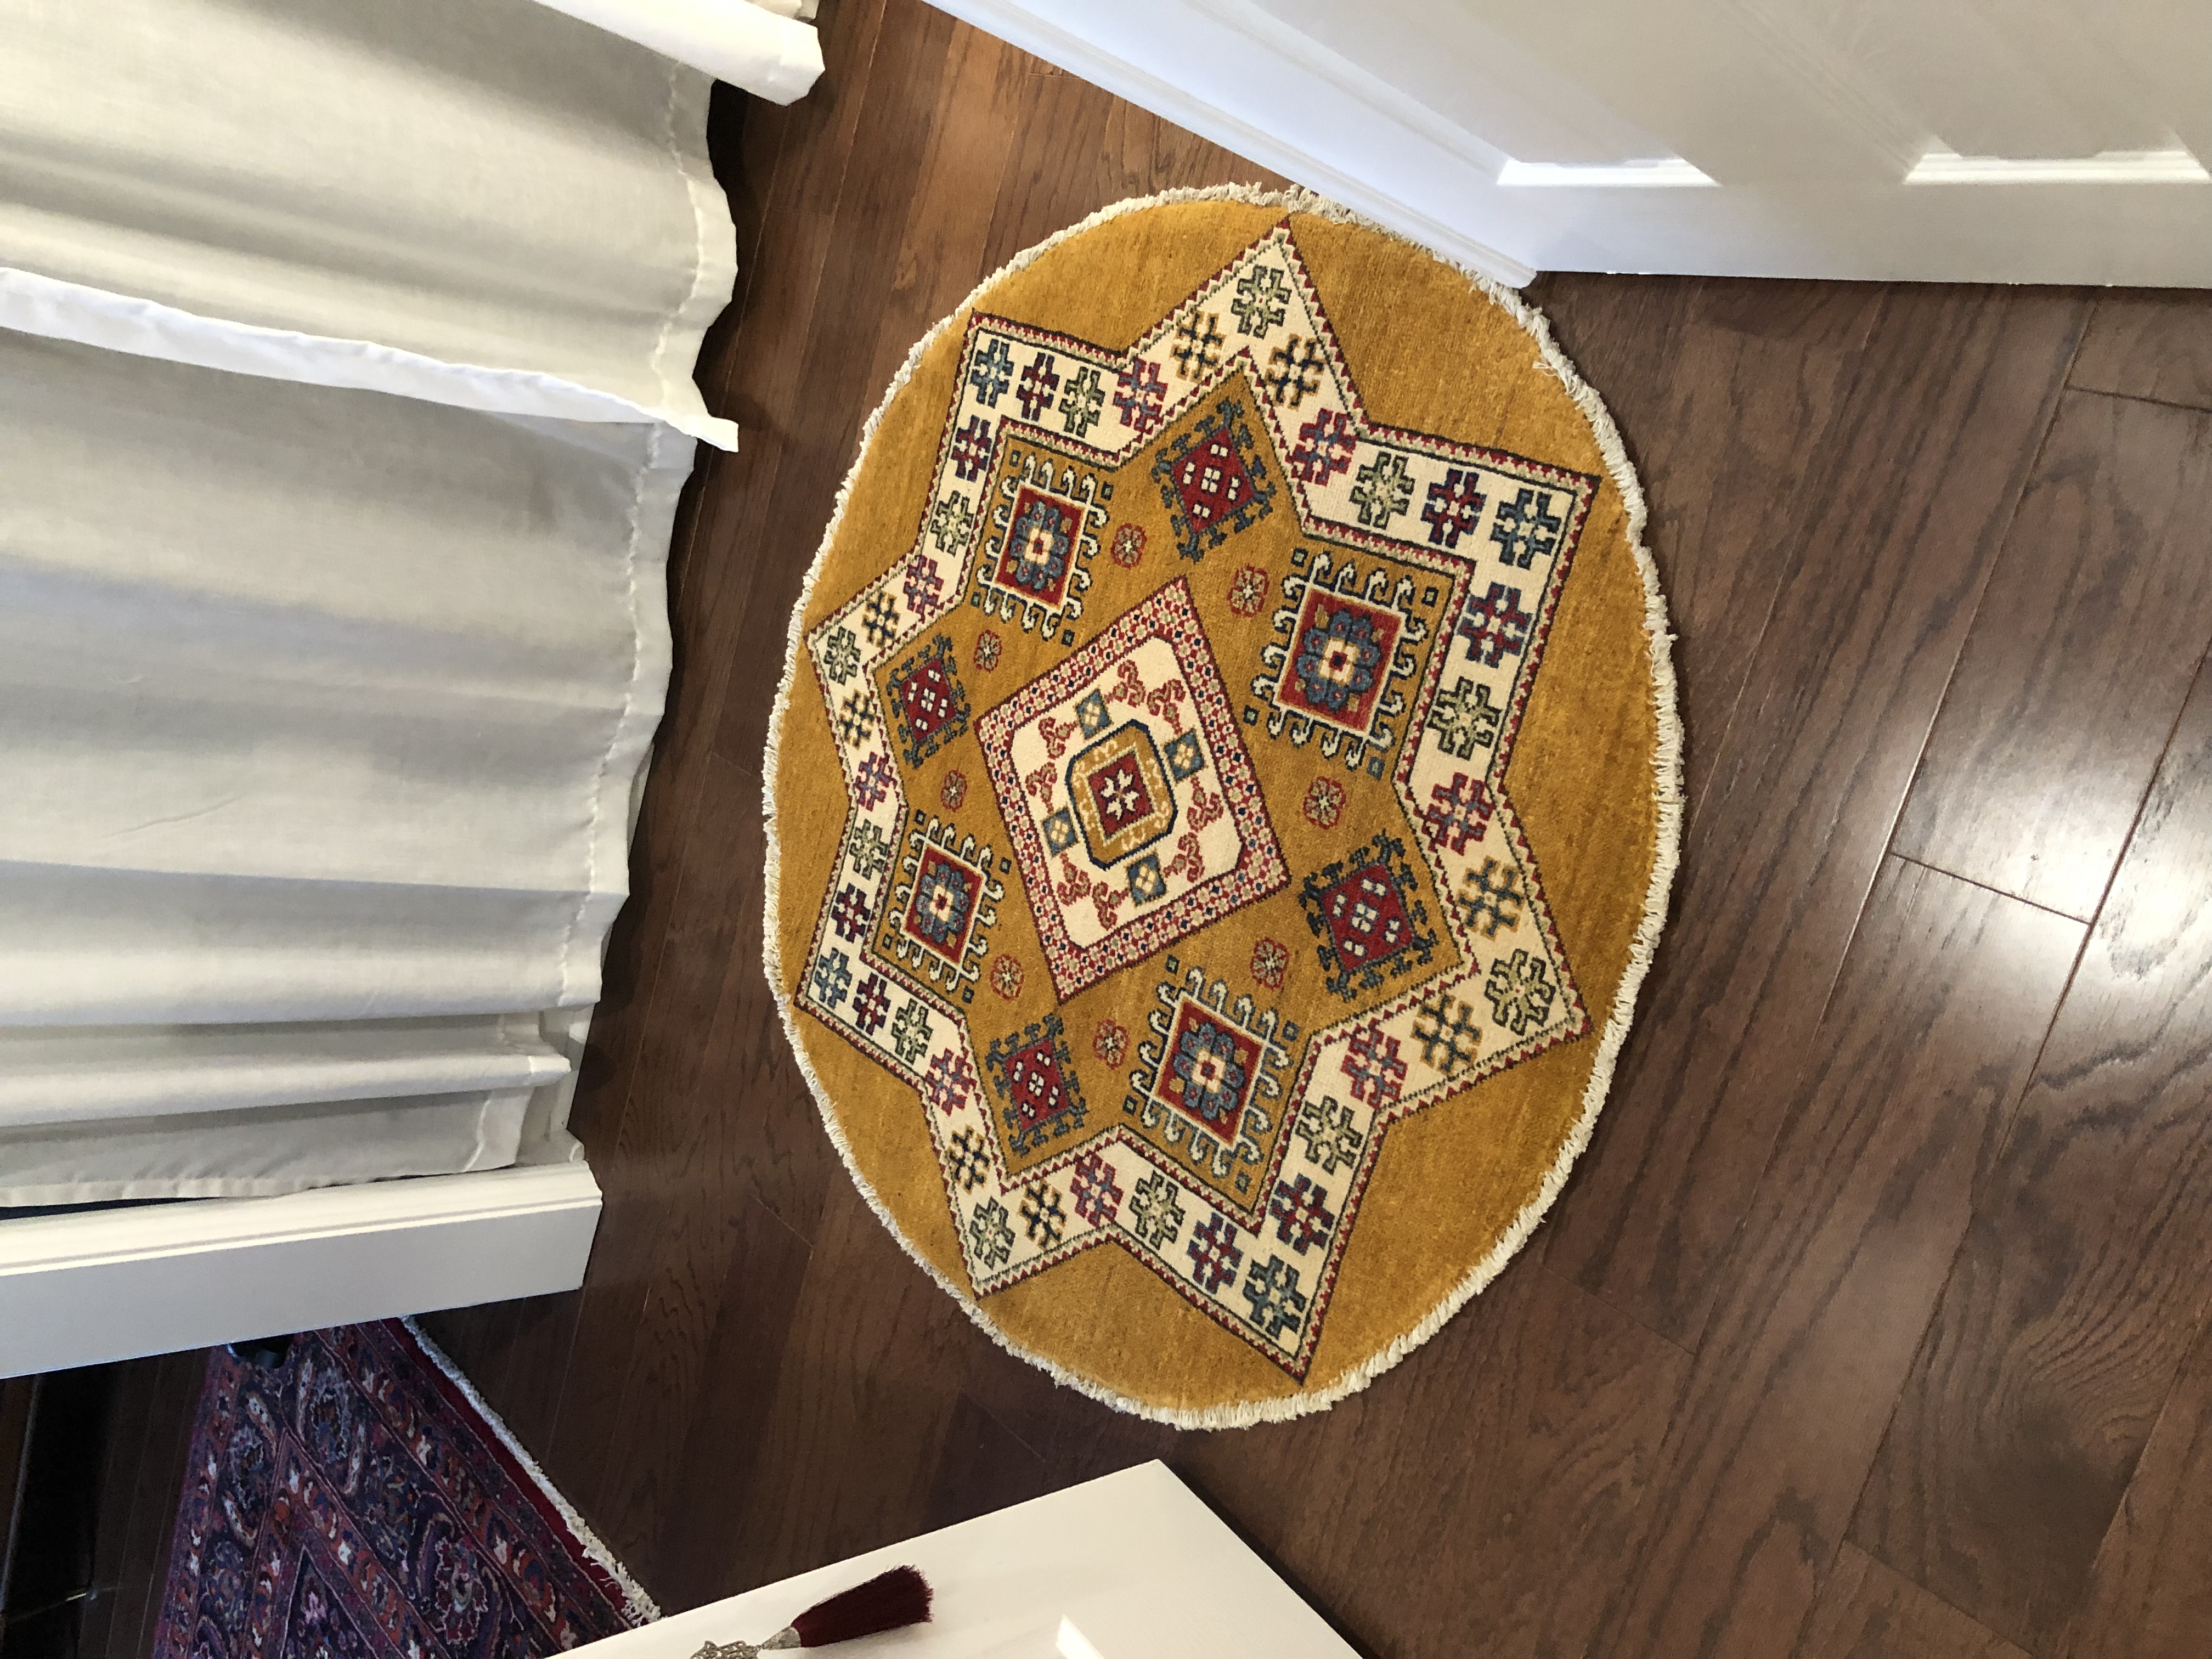 This is our 4th rug purchase. We have been very happy with the quality. The items are just as described. We recommend this site to our friends! Thanks!